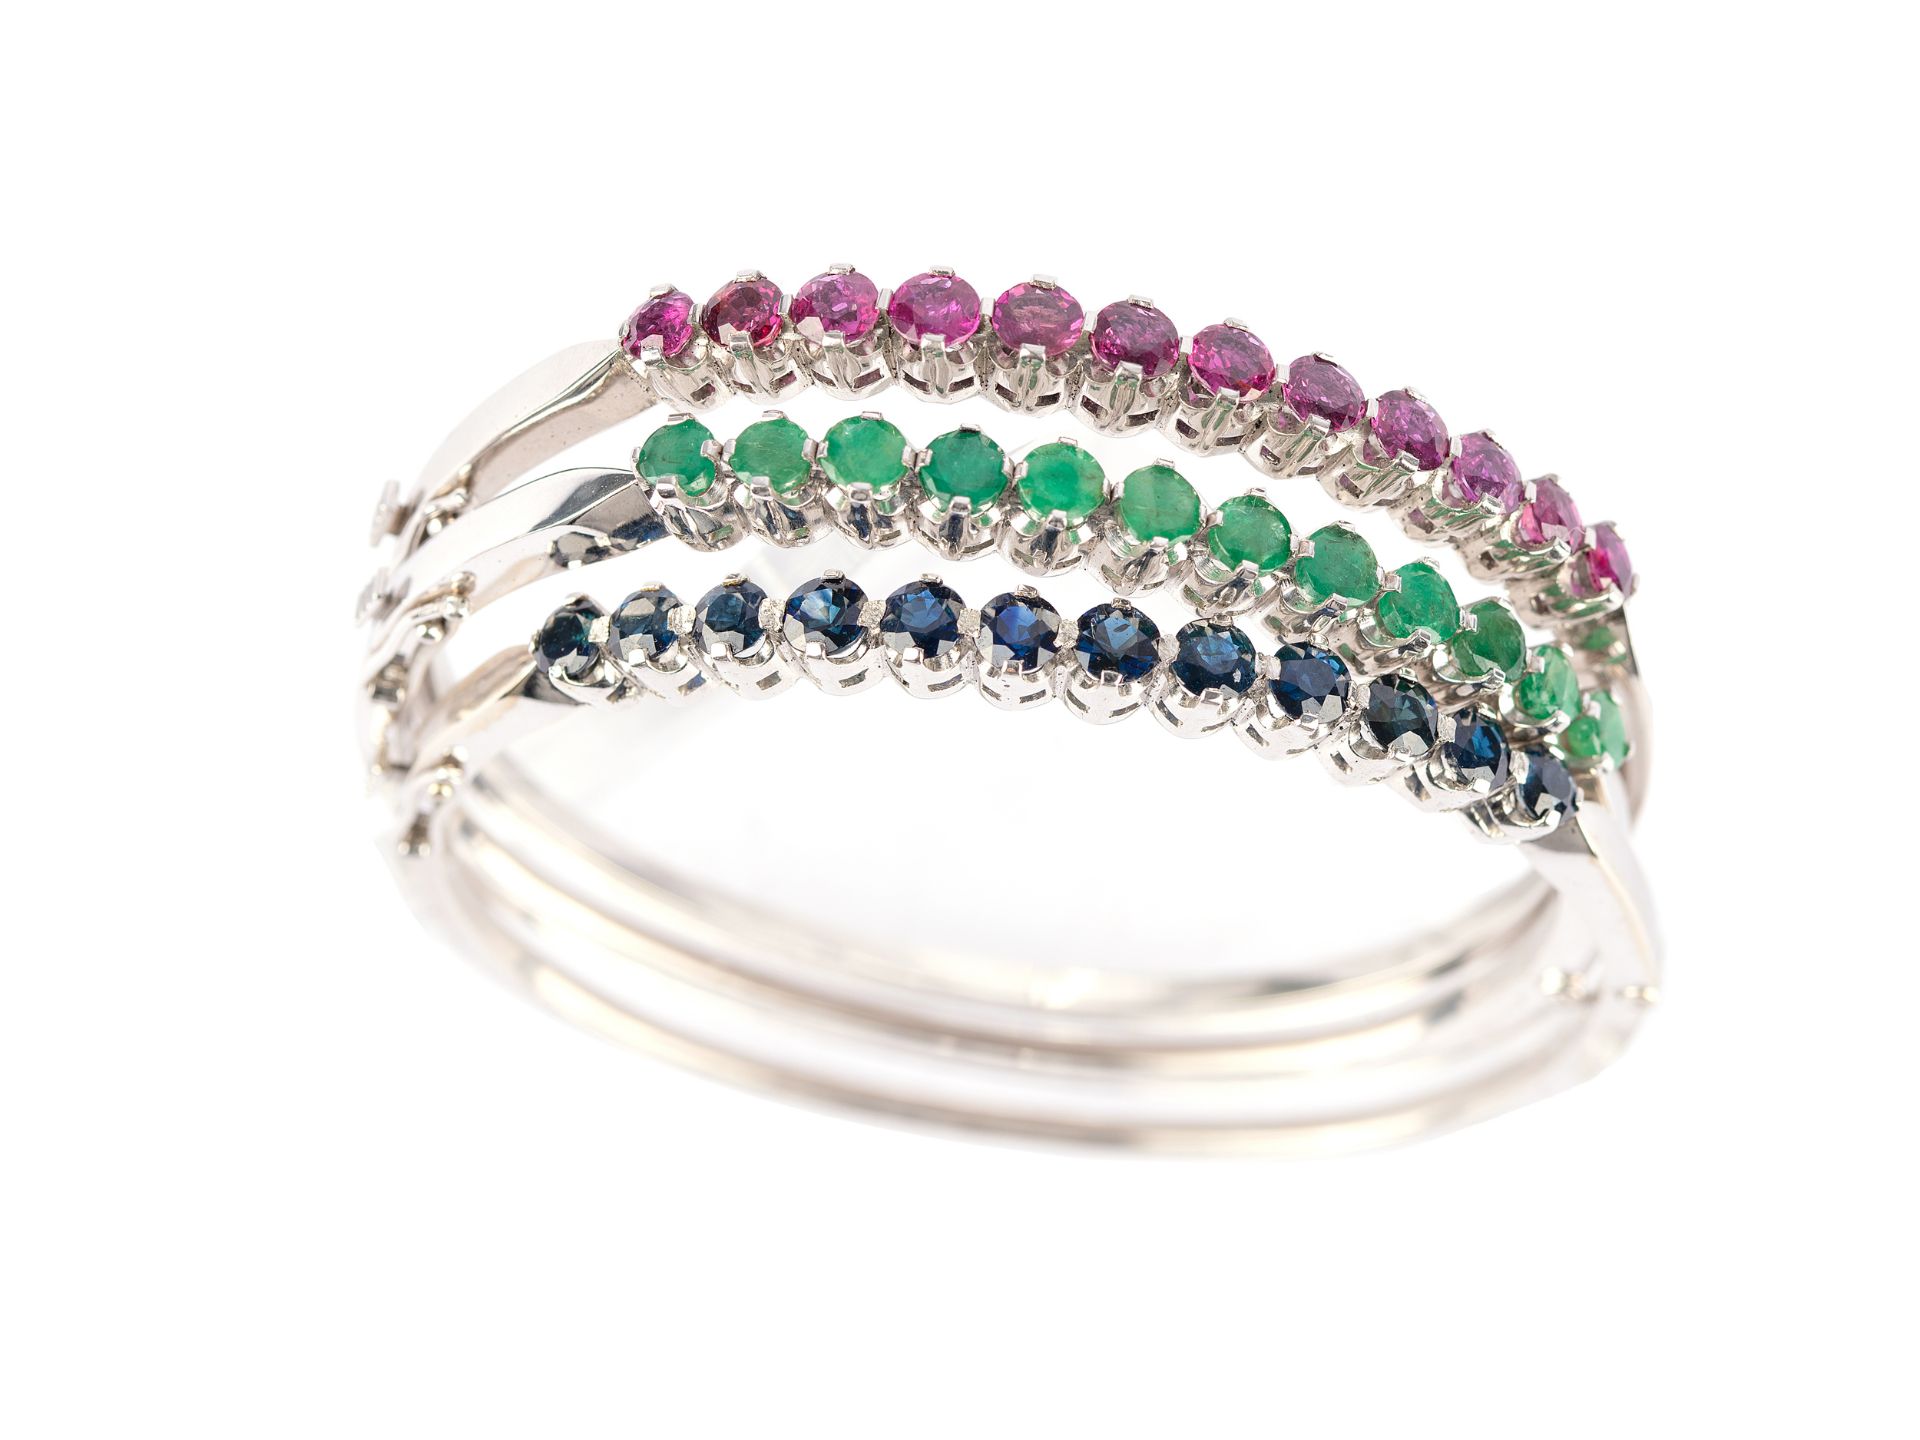 Mixed lot: 3 bangles, 14kt white gold marked, 12 sapphires, emeralds and rubies each?